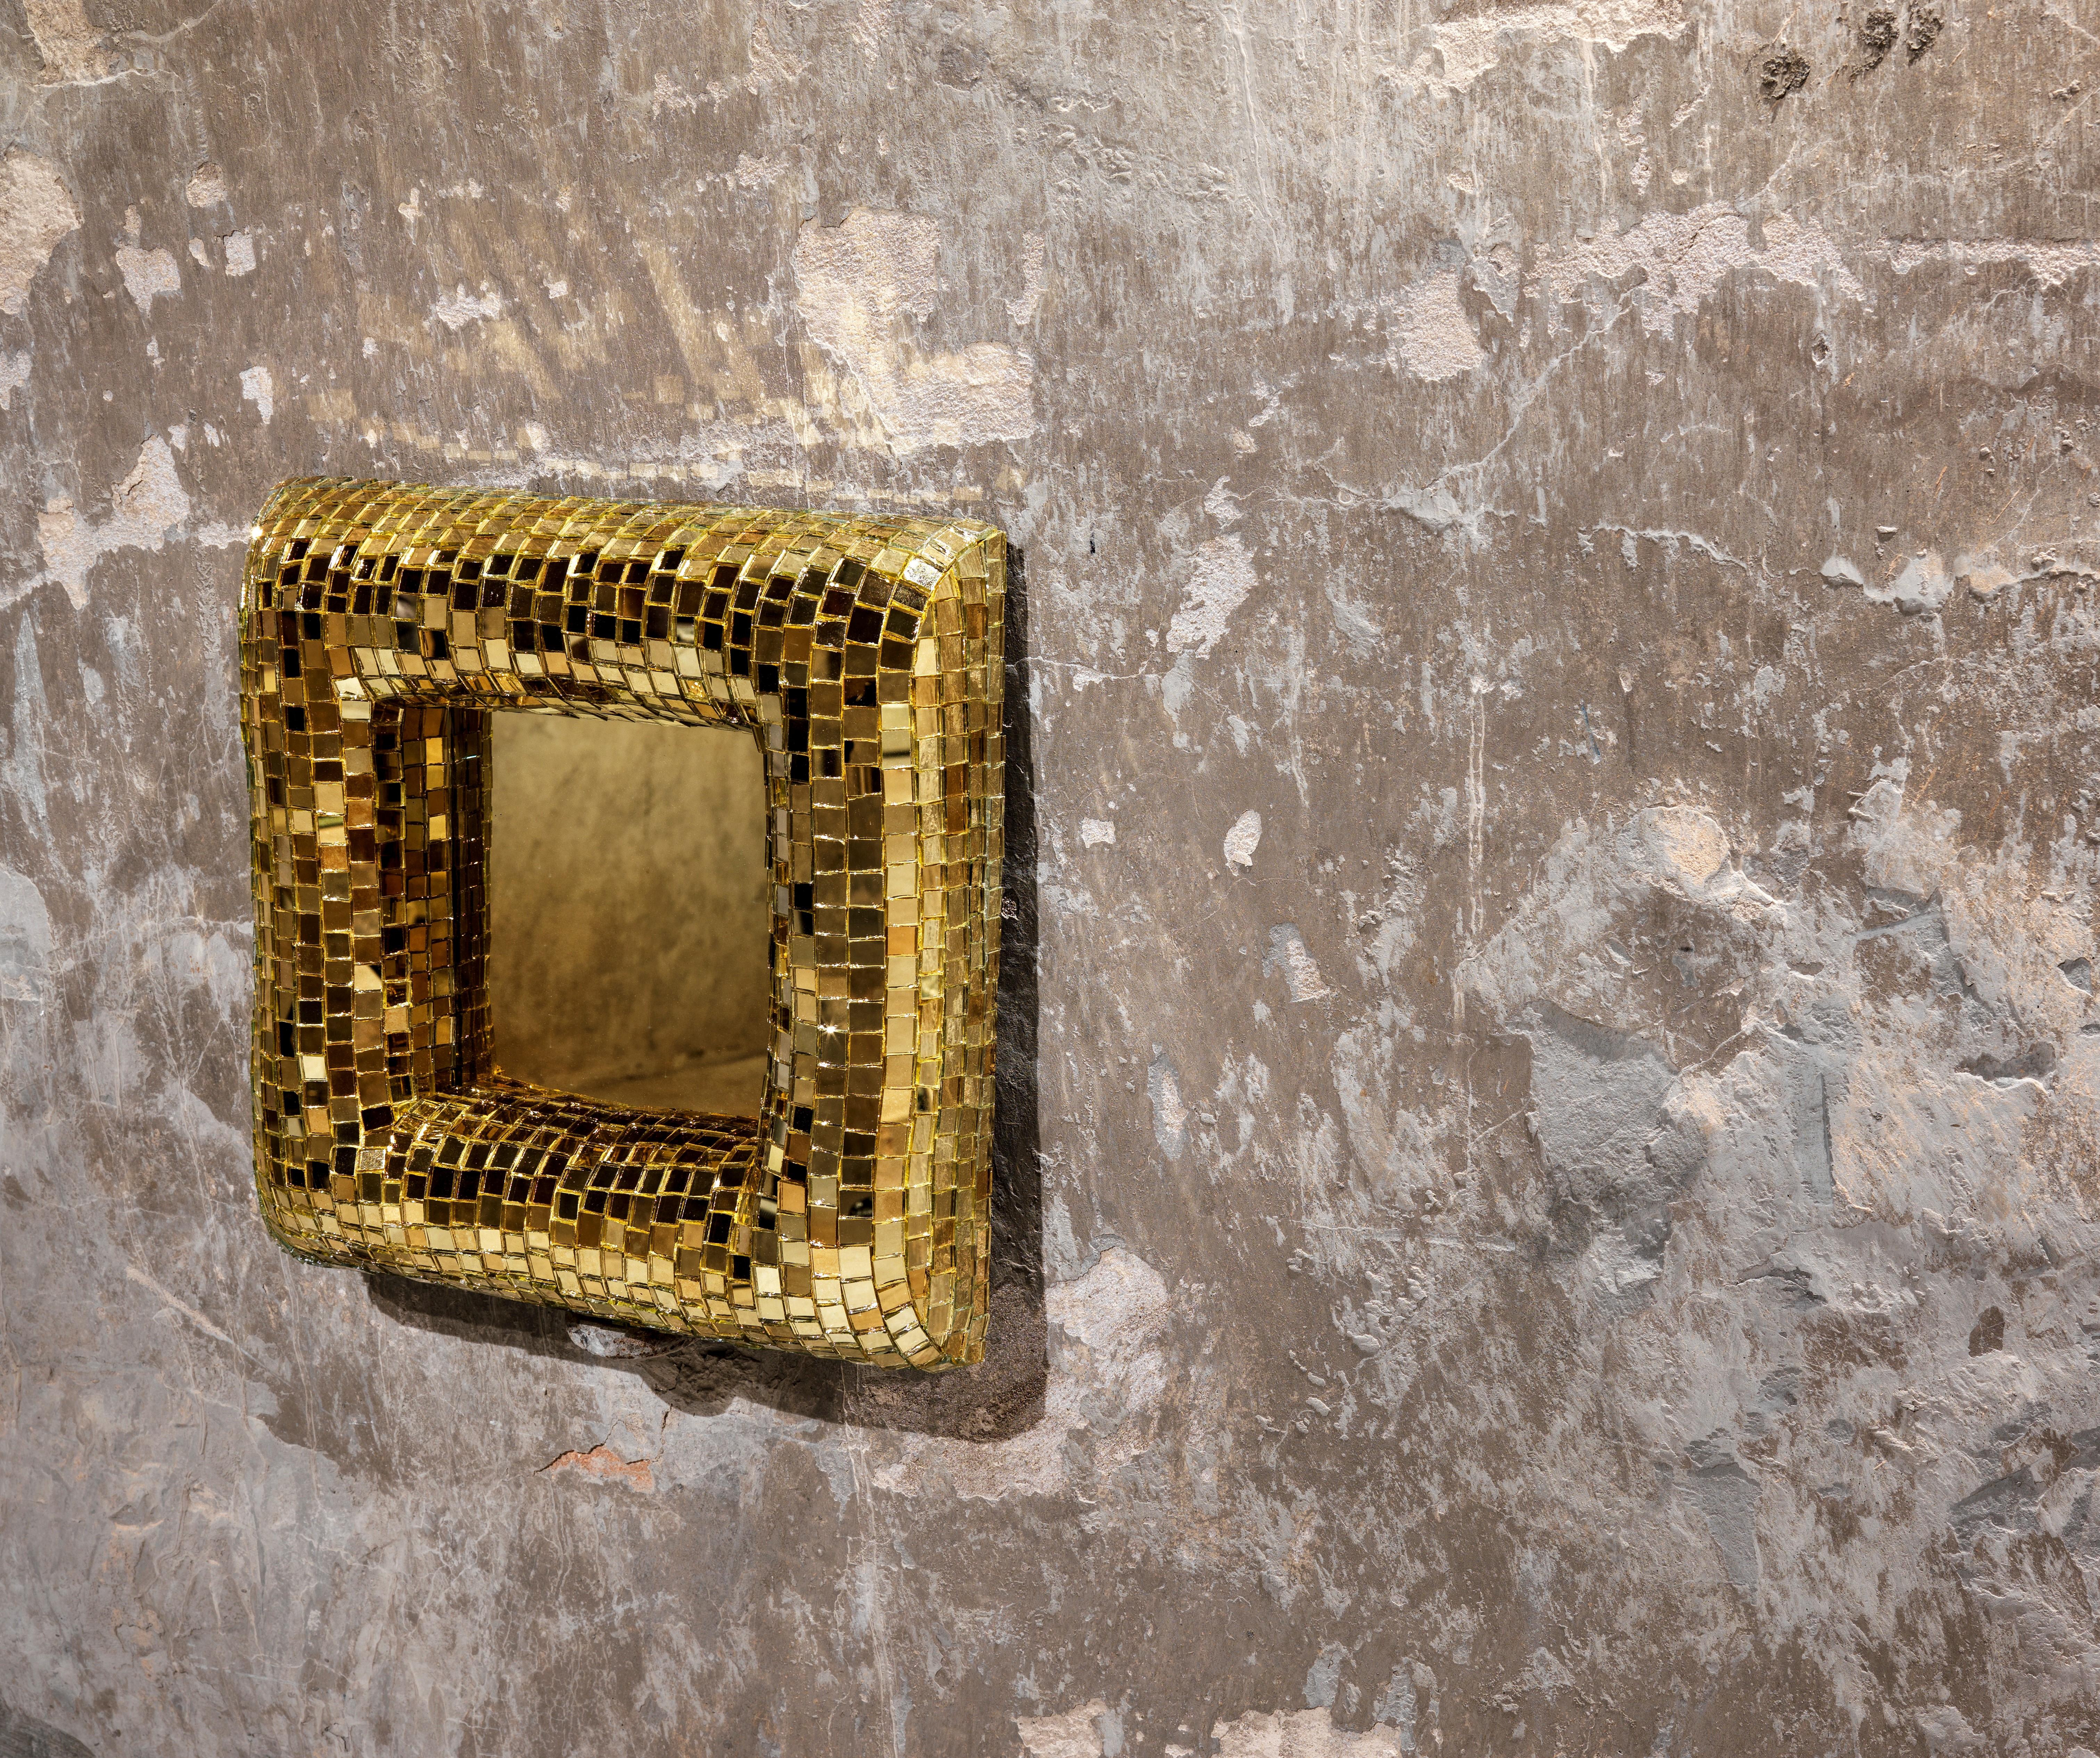 Gold rounded mirror by Davide Medri
Materials: mirror mosaic
Dimensions: W 40 x H 40 cm
Also Available in silver and in 3 sizes: 40 x 40, 60 x 60, 80 x 80 cm


Davide Medri was born in Cesena on August 7th 1967 and graduated at the Academy of Fine